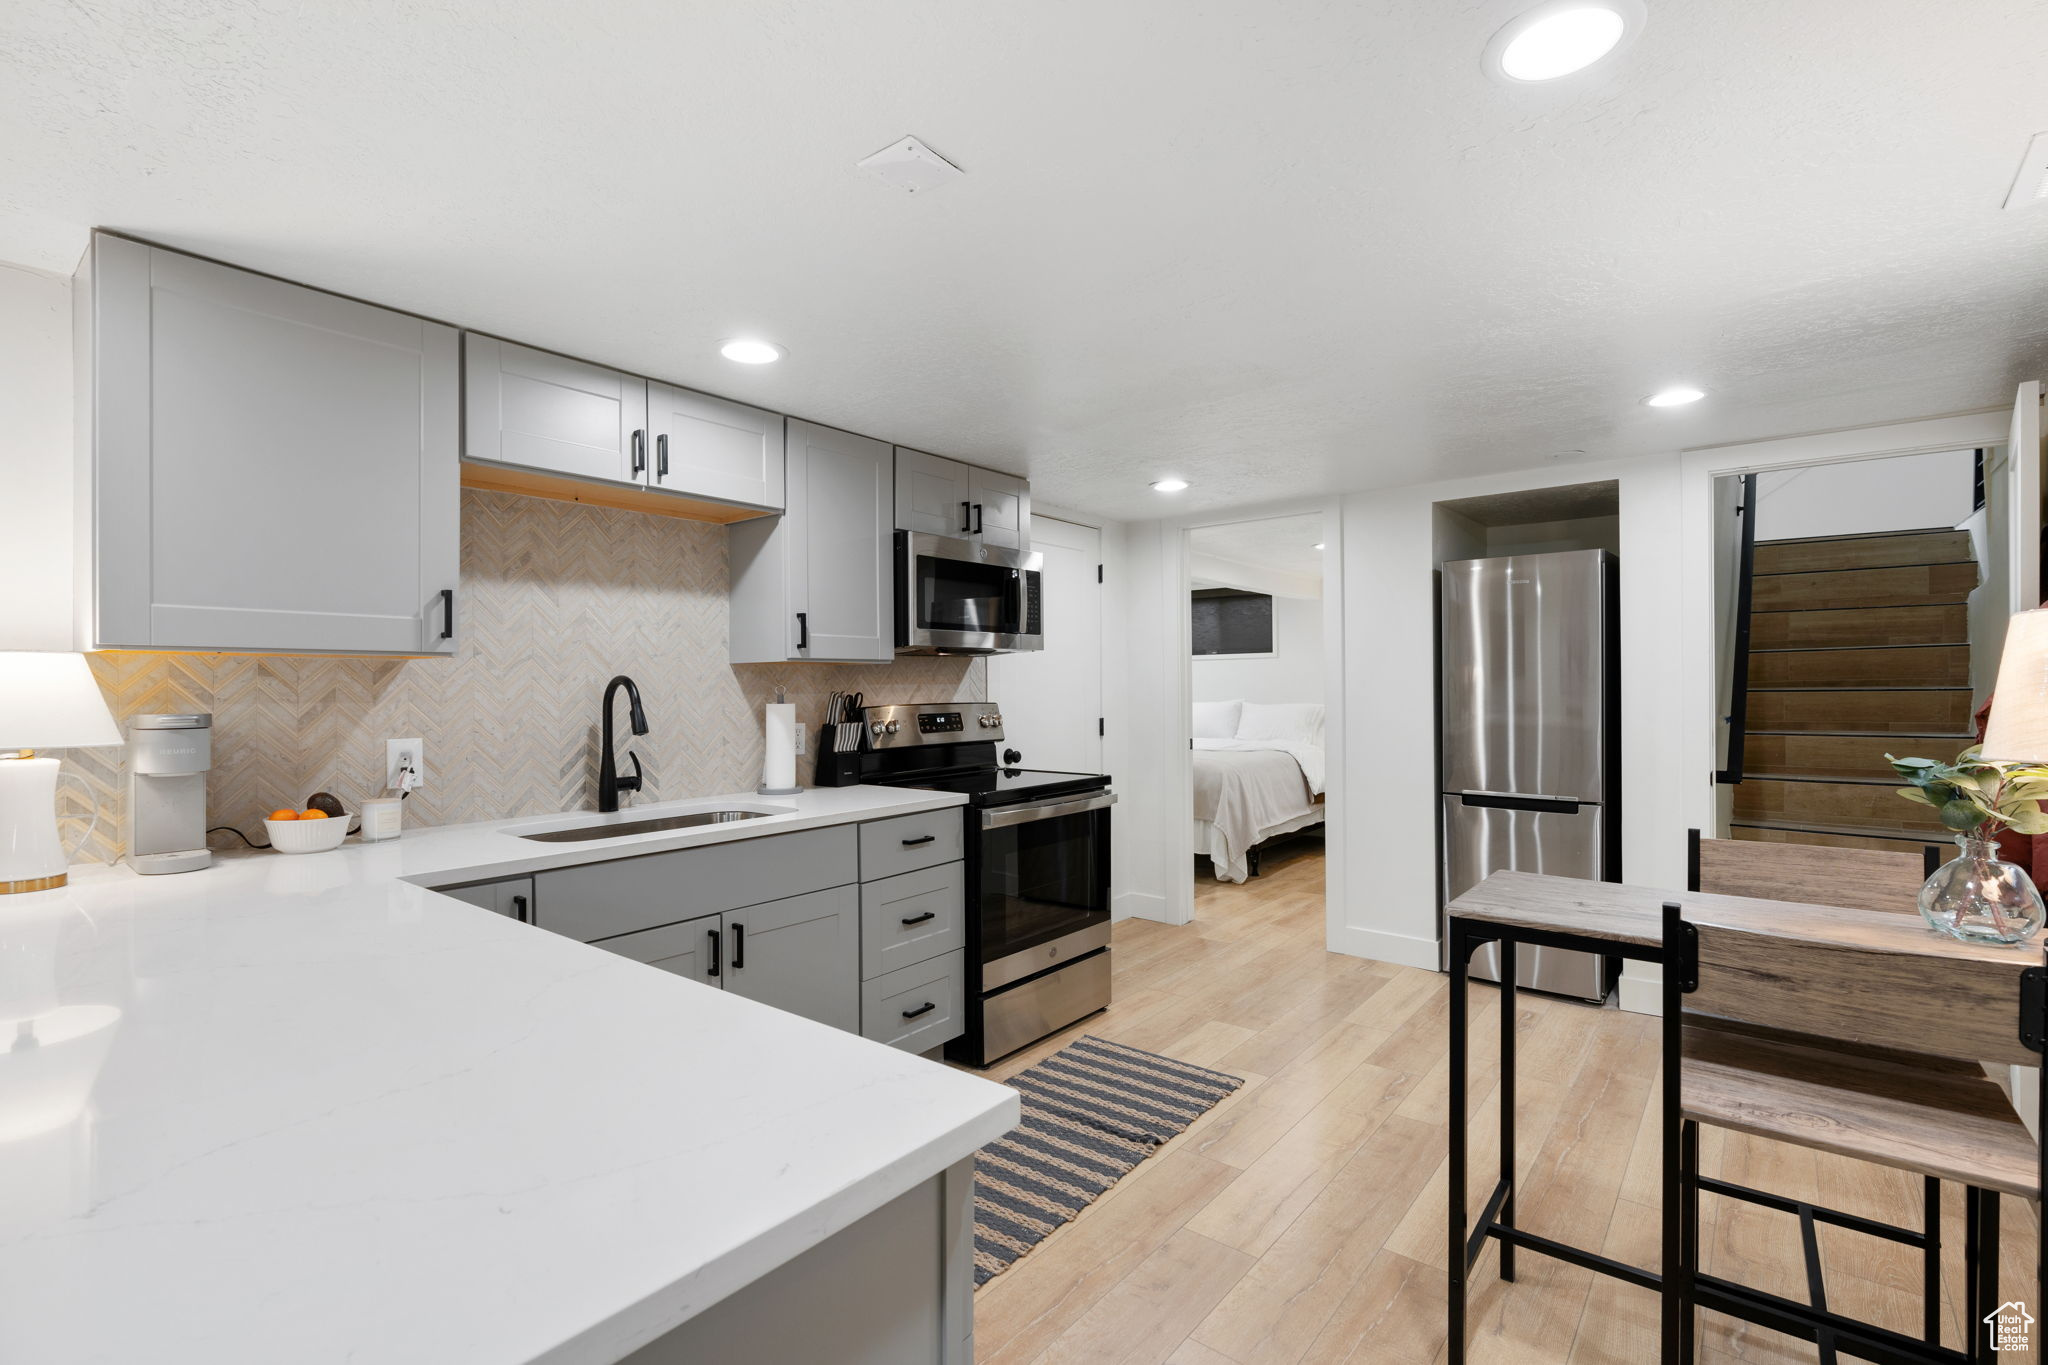 Kitchen featuring gray cabinetry, appliances with stainless steel finishes, sink, and light wood-type flooring